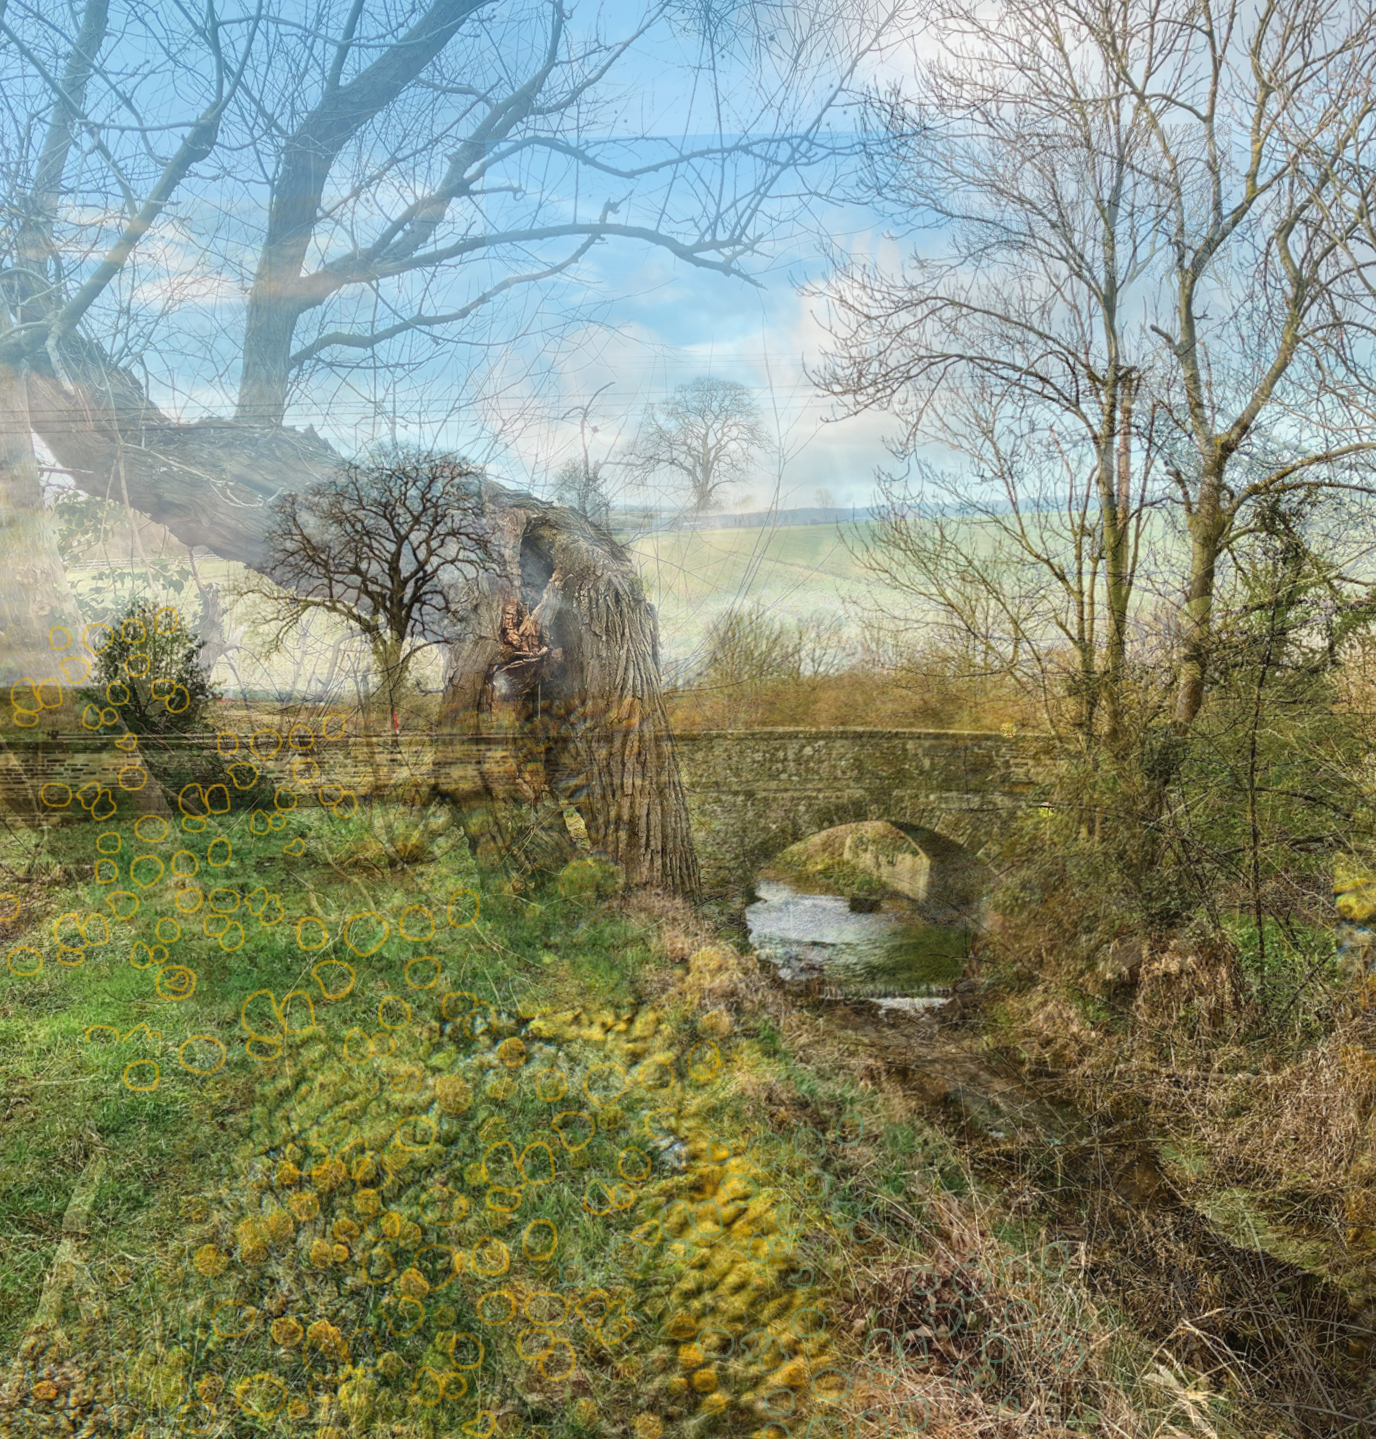 digital collage of drawing and photographs taken on 30th January 2023, on the place once known as Westings Meadow. One of an on-going series about local history, landscape & place